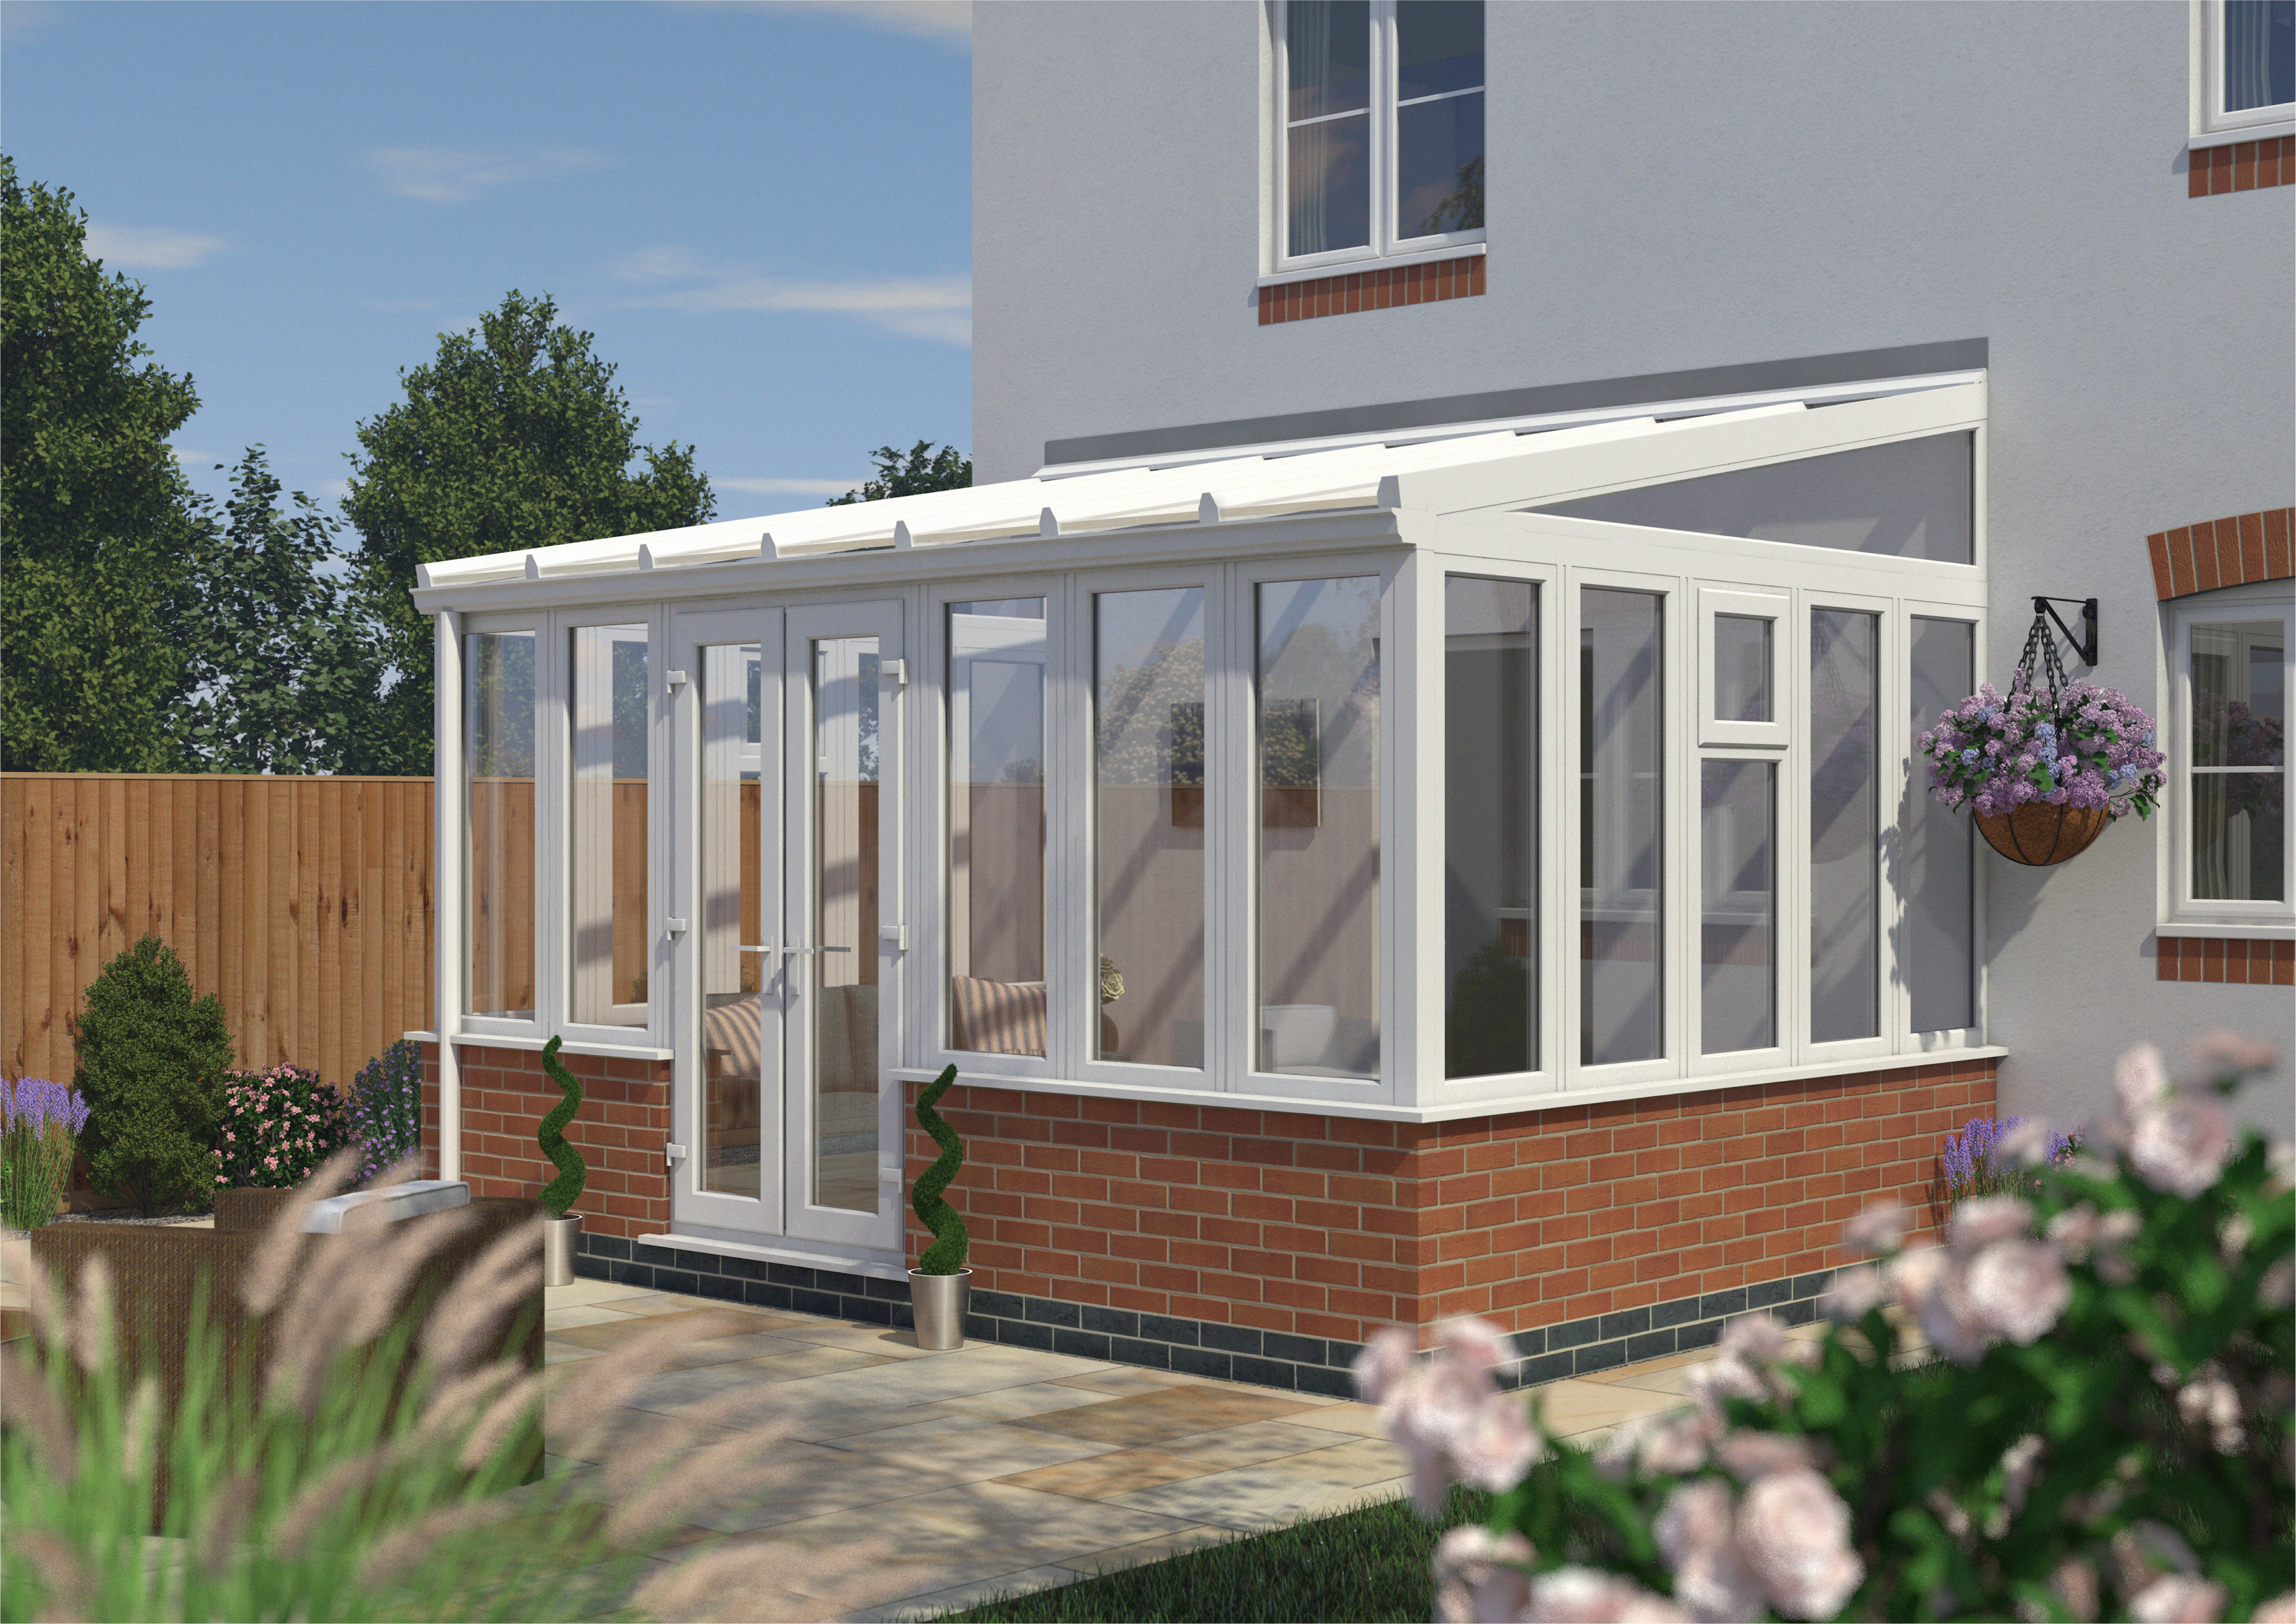 Image of Euramax Lean To Conservatory Dwarf Wall - White - 14 ft x 10ft